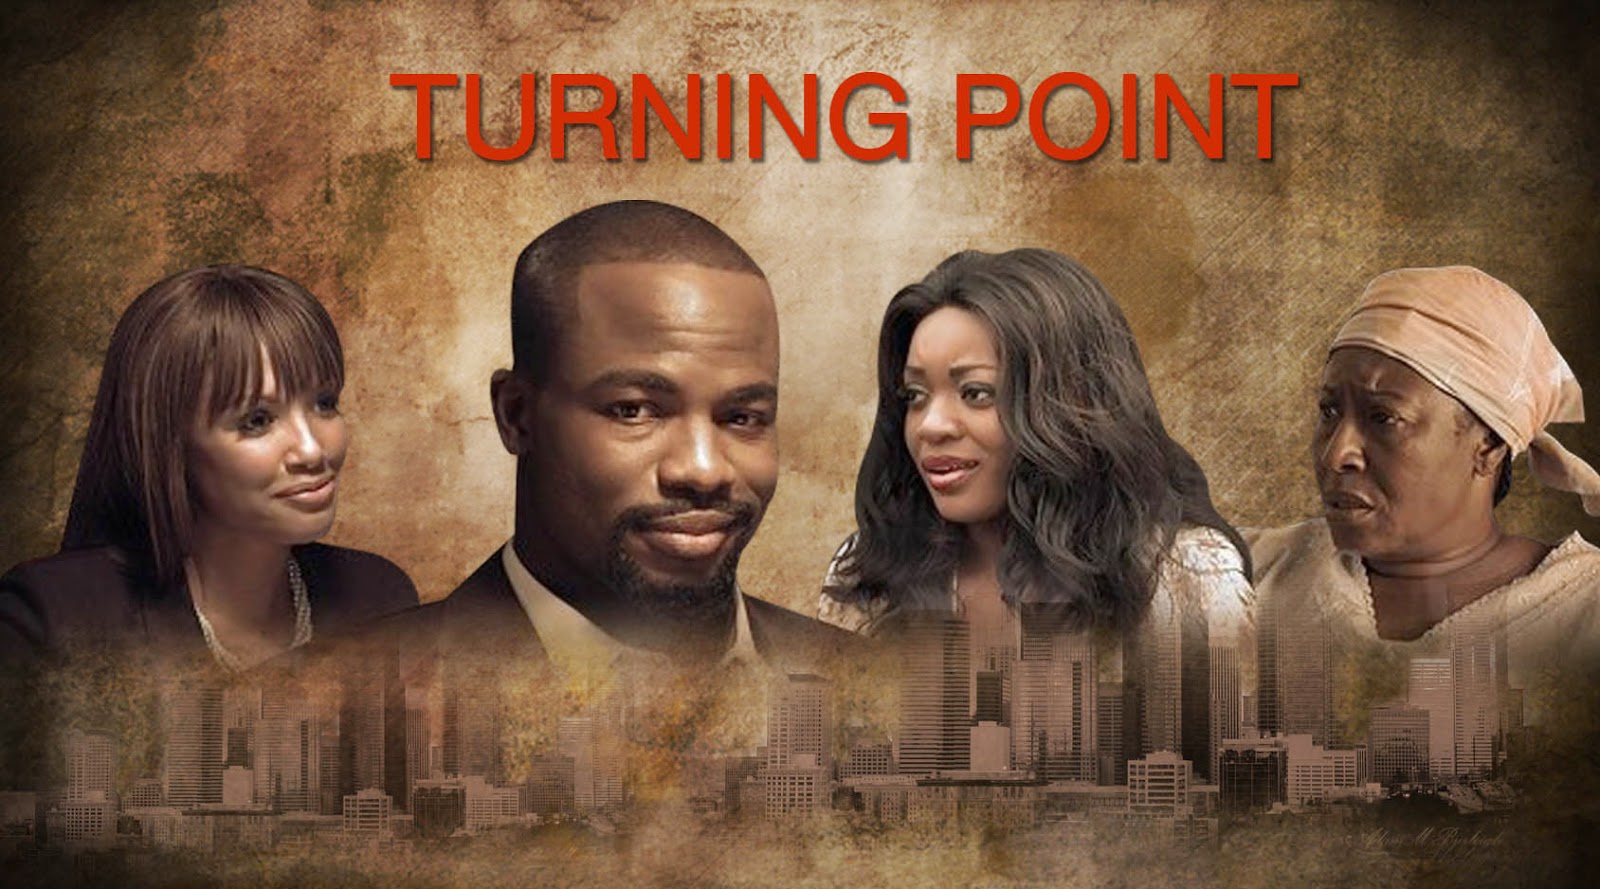 The Nollywood-Hollywood collaboration Movie 'TURNING POINT' is now showing on iROKOtv ...